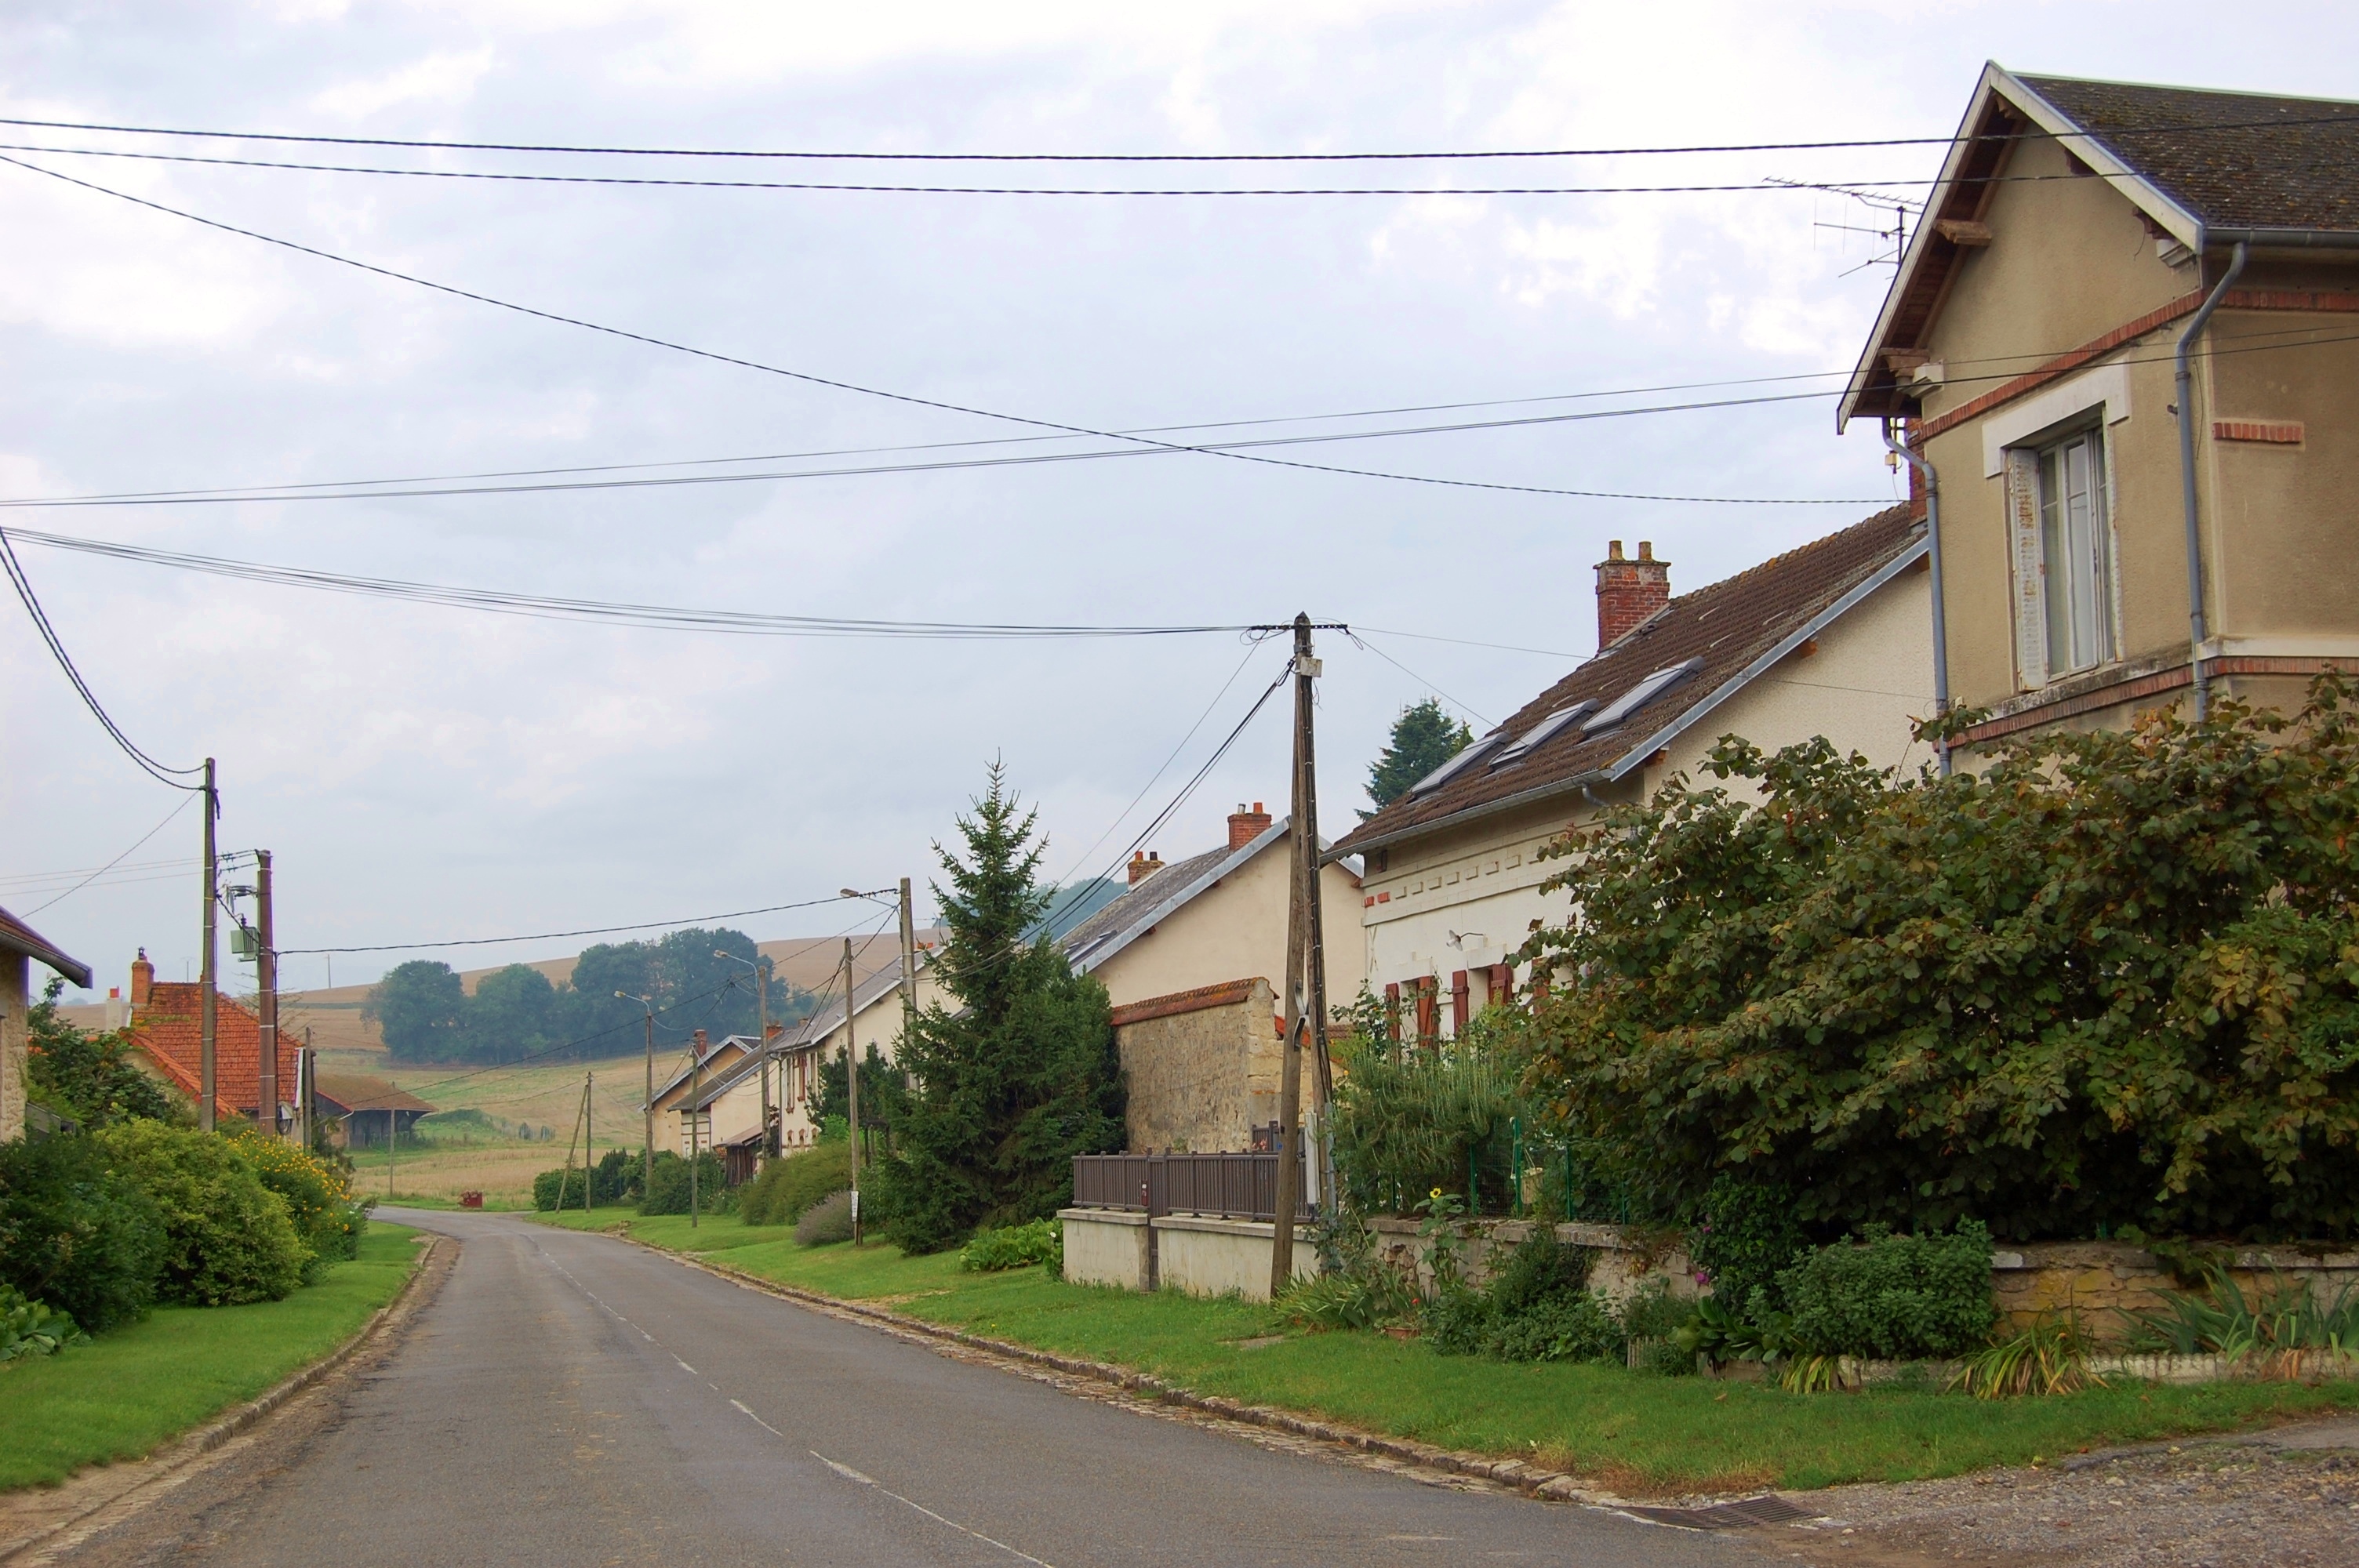 The new village of Craonne.